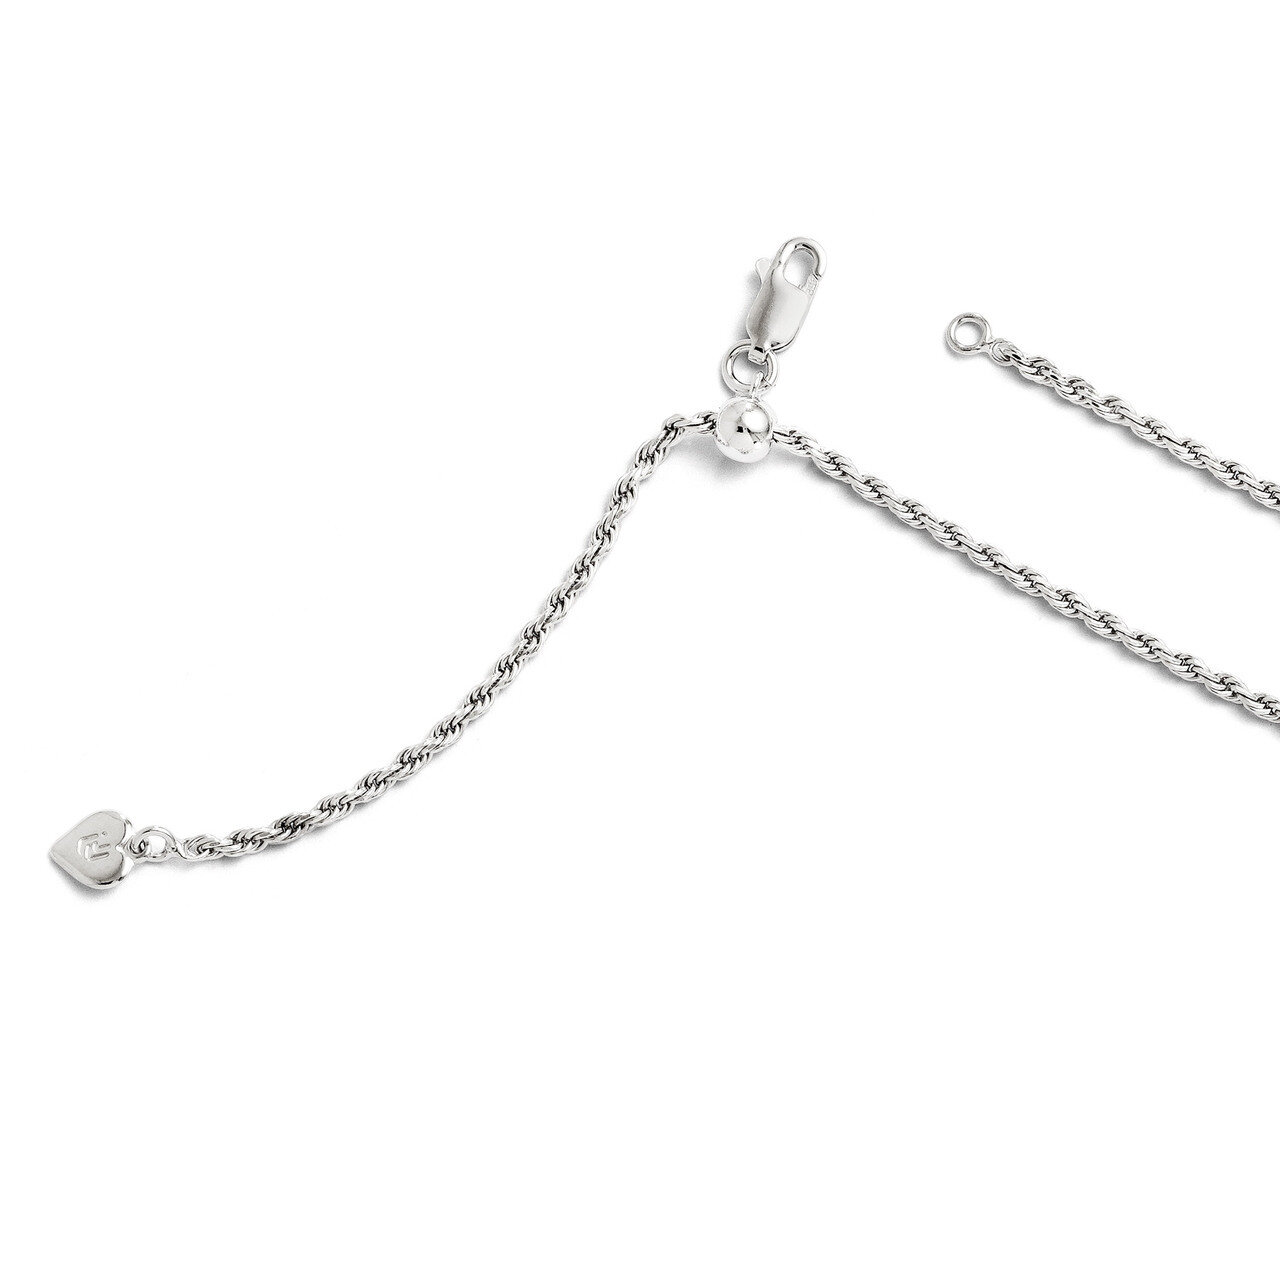 Adjustable Rope Chain 30 Inch - Sterling Silver HB-FC26-30